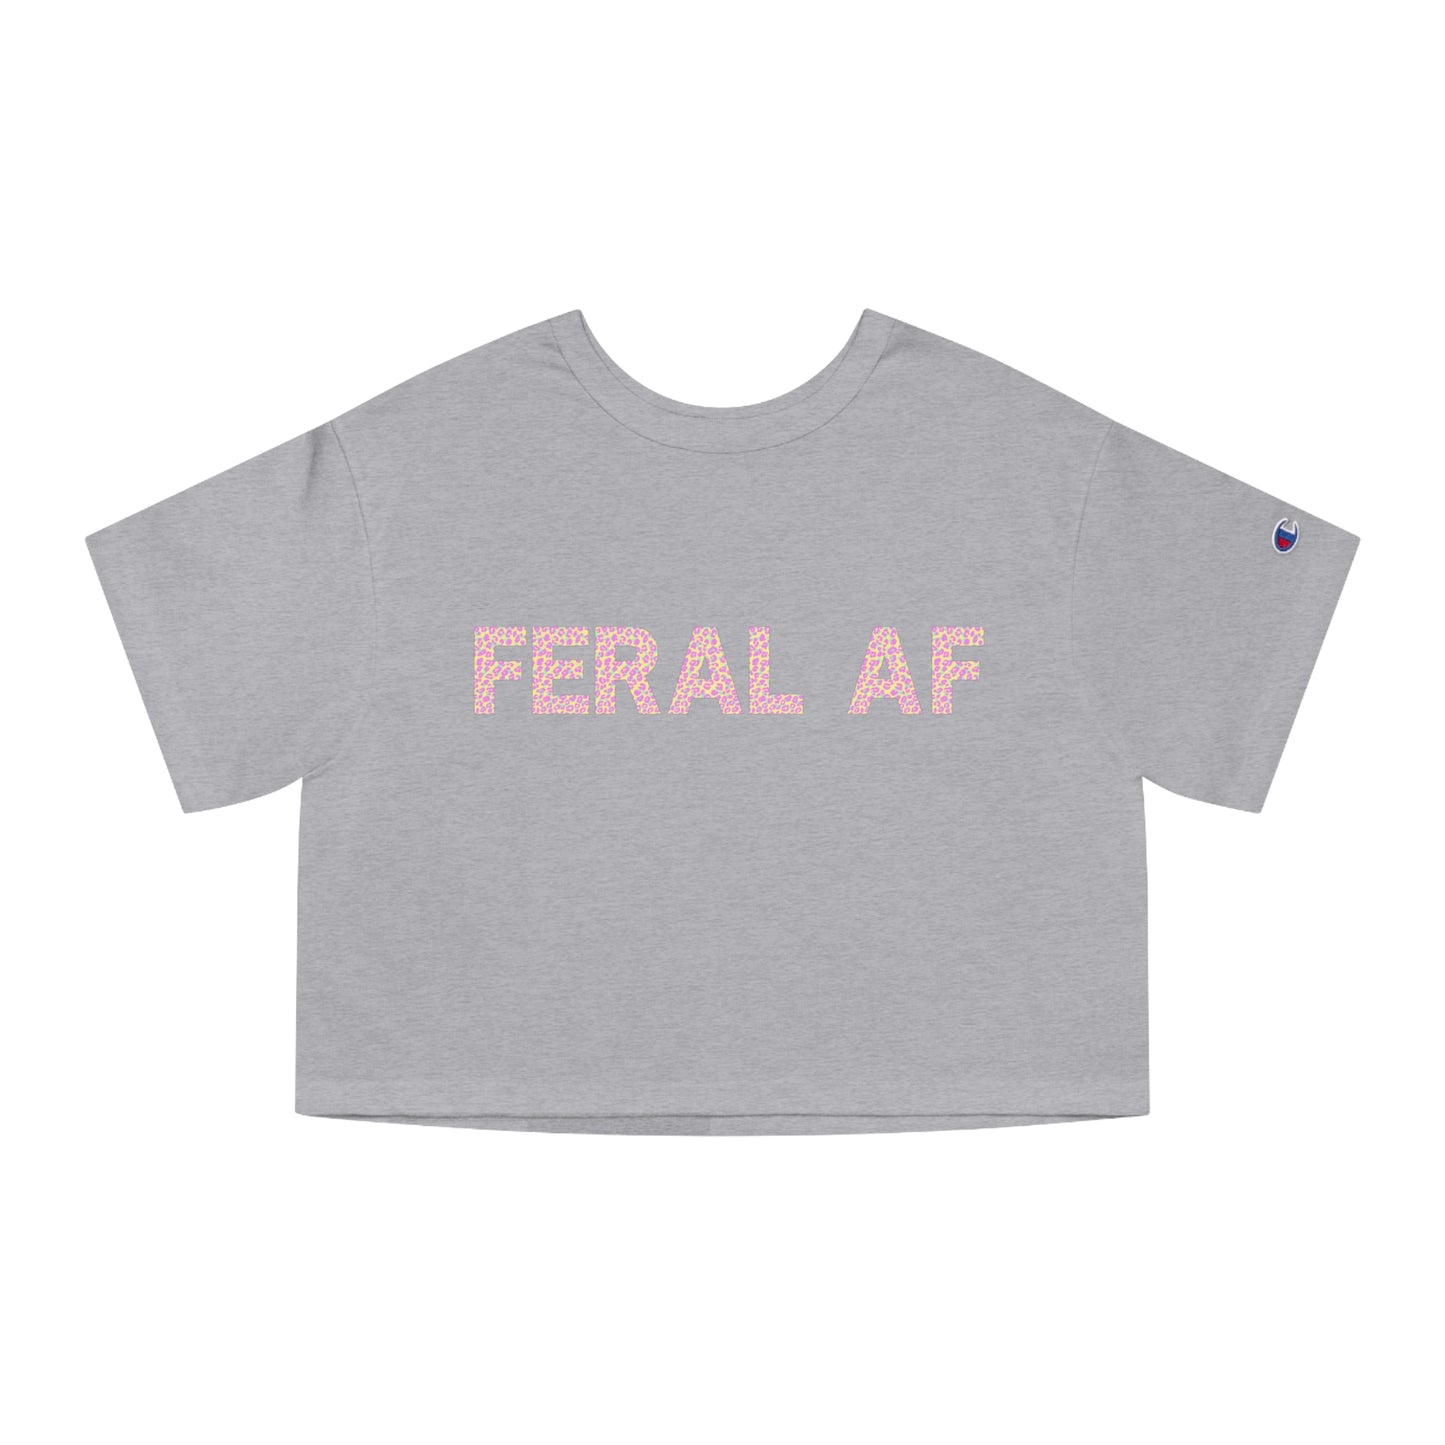 FERAL Champion Women's Heritage Cropped T-Shirt